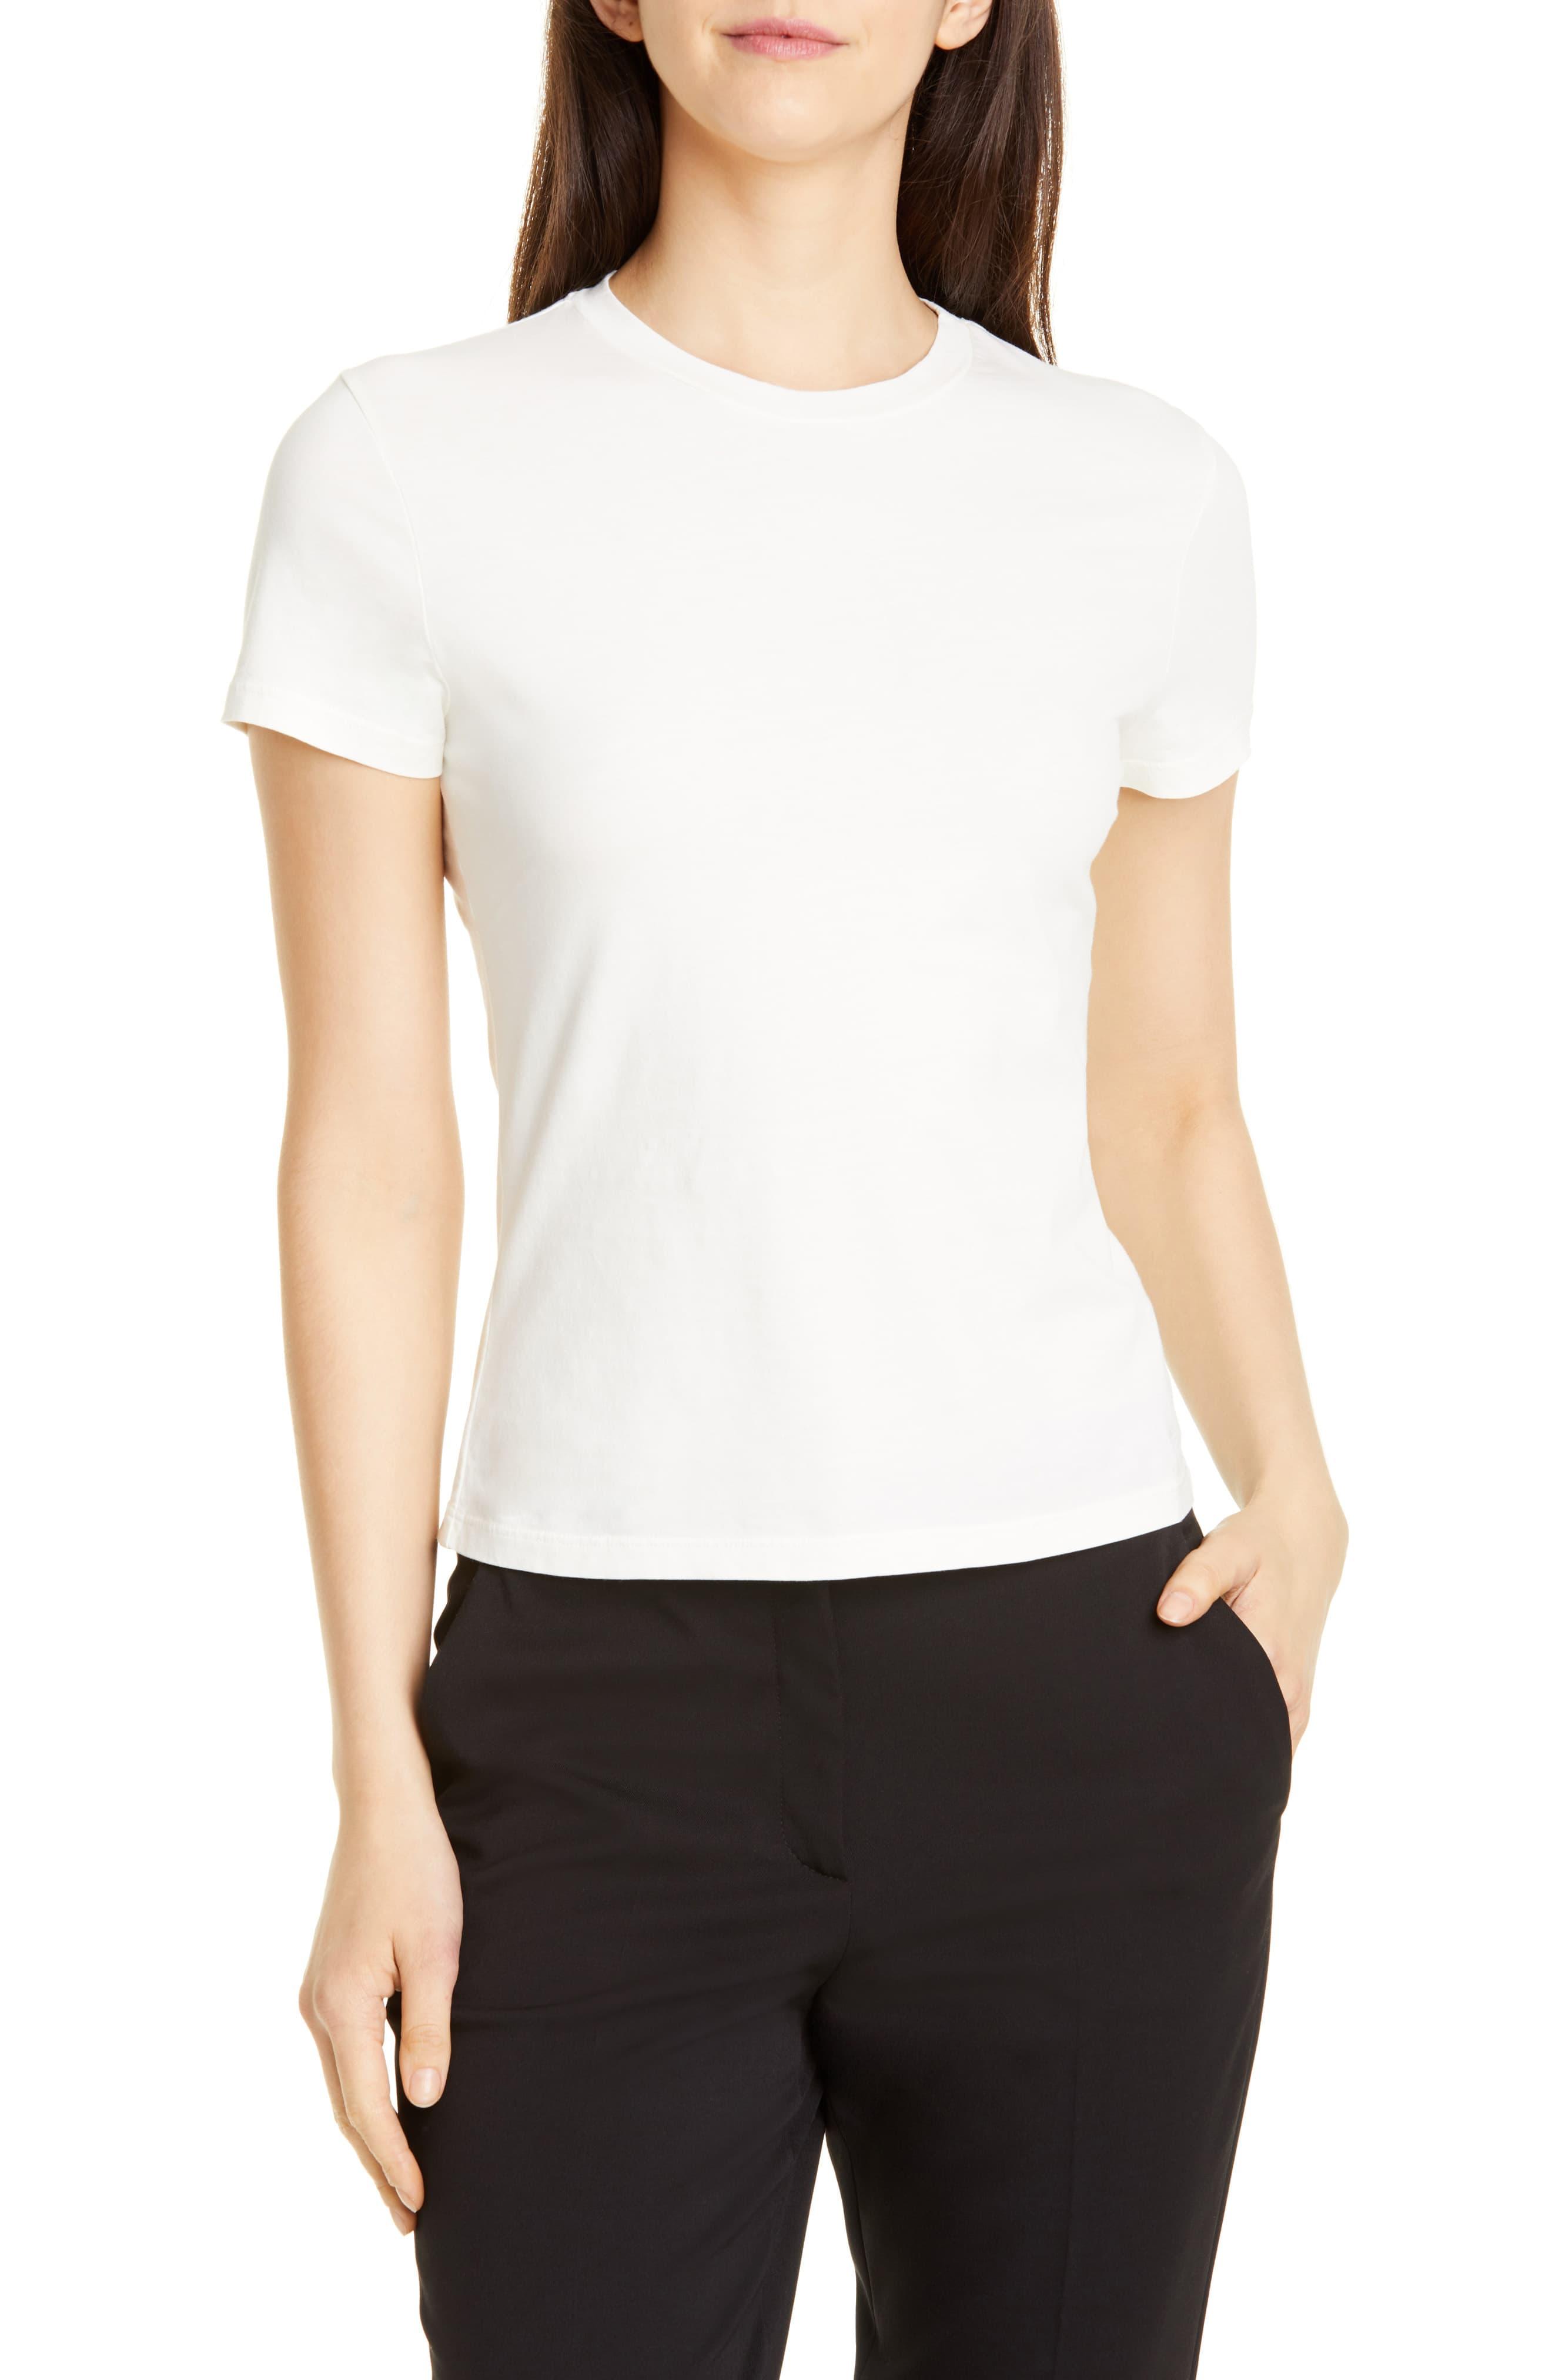 Theory Pima Cotton Tiny Tee in White - Lyst